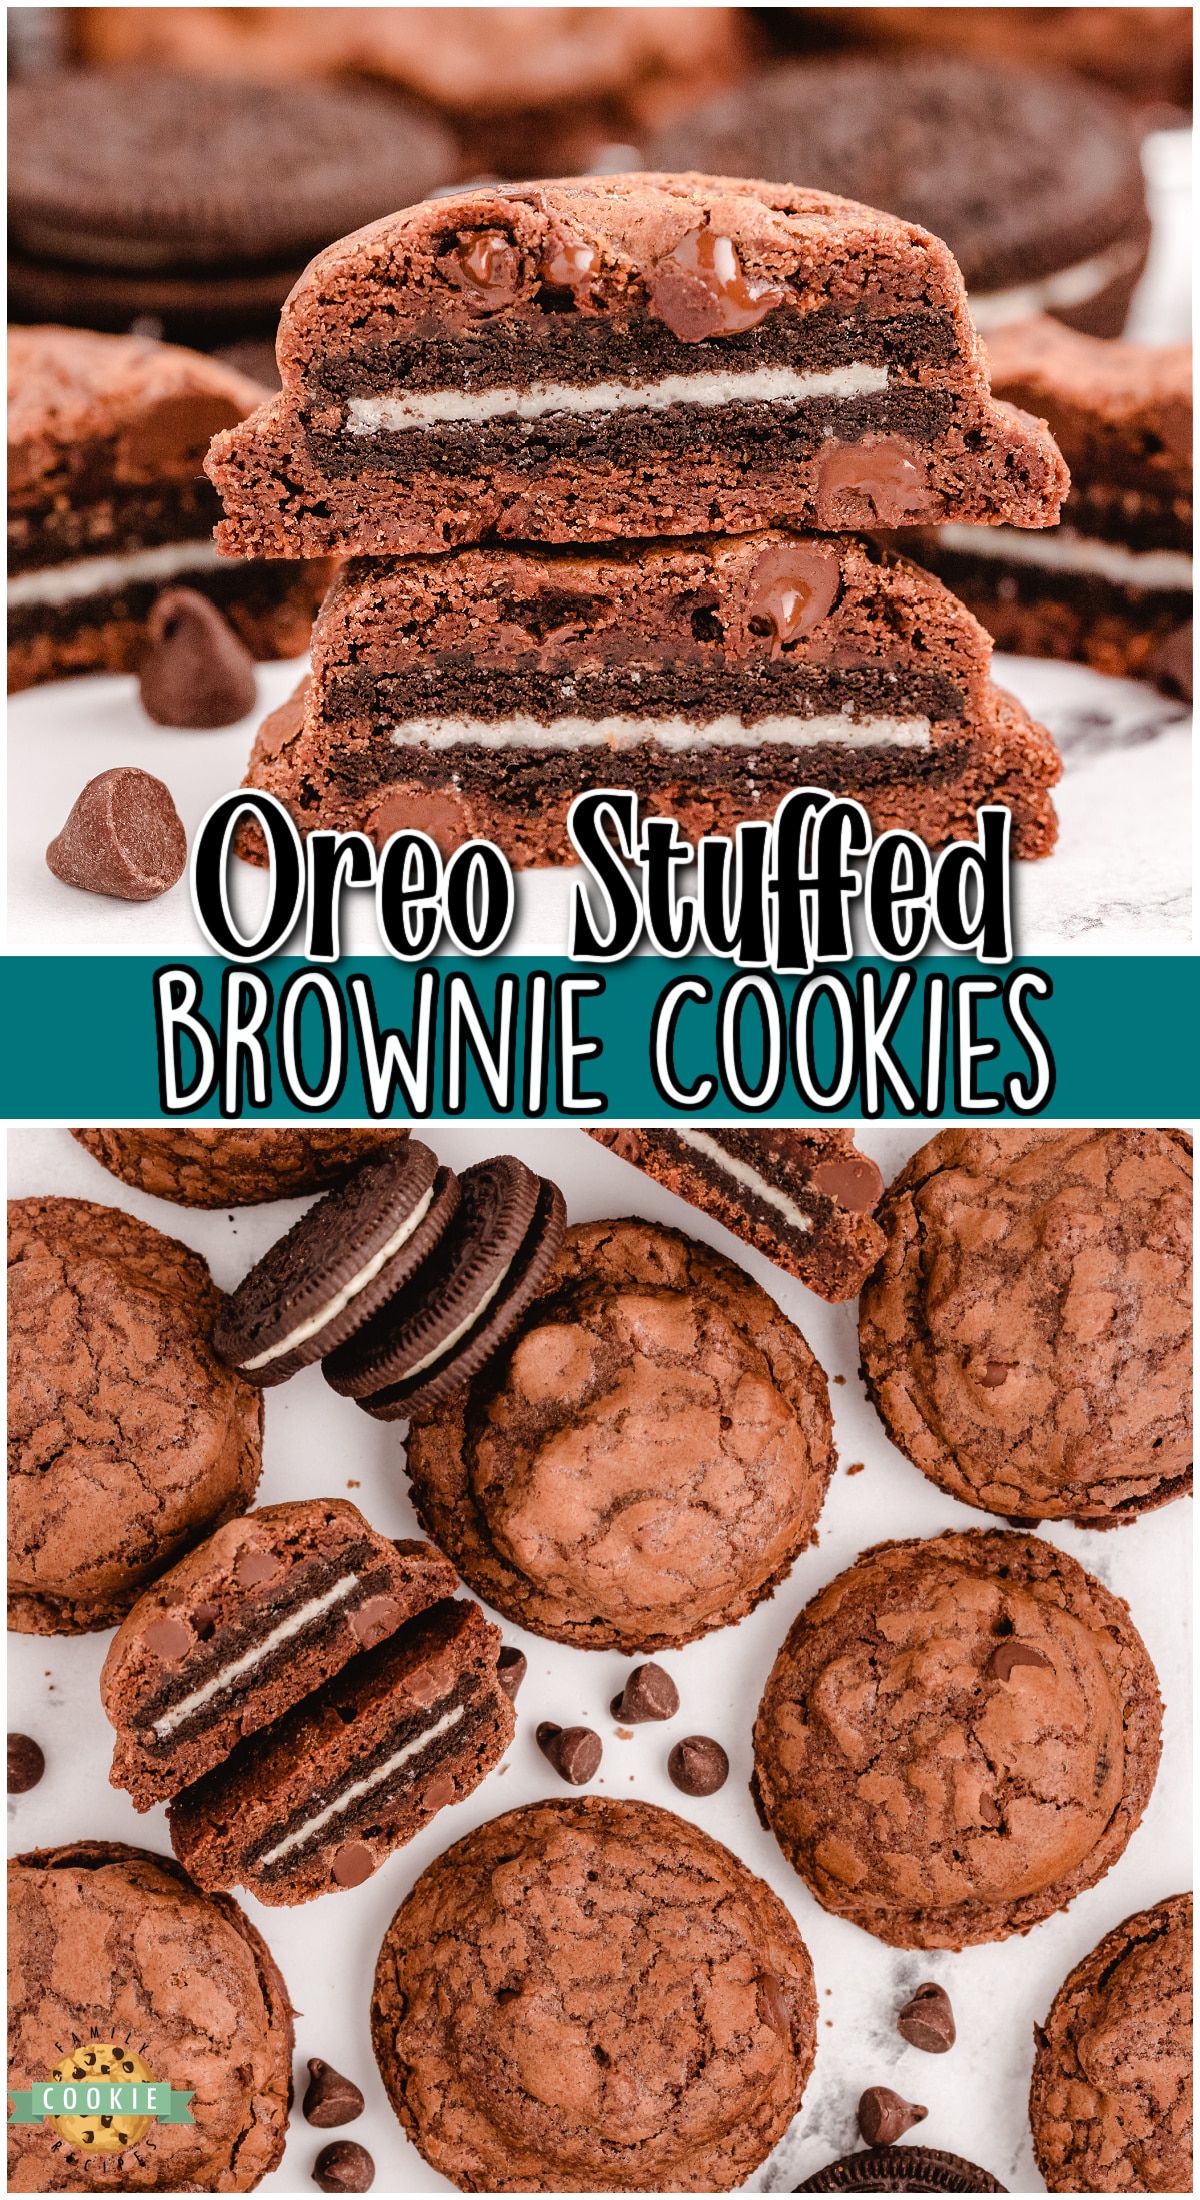 Oreo Stuffed Brownie Cookies are decadent chocolate cookies with Oreos baked in the center! These stuffed cookies are an incredible take on brownie cookies!